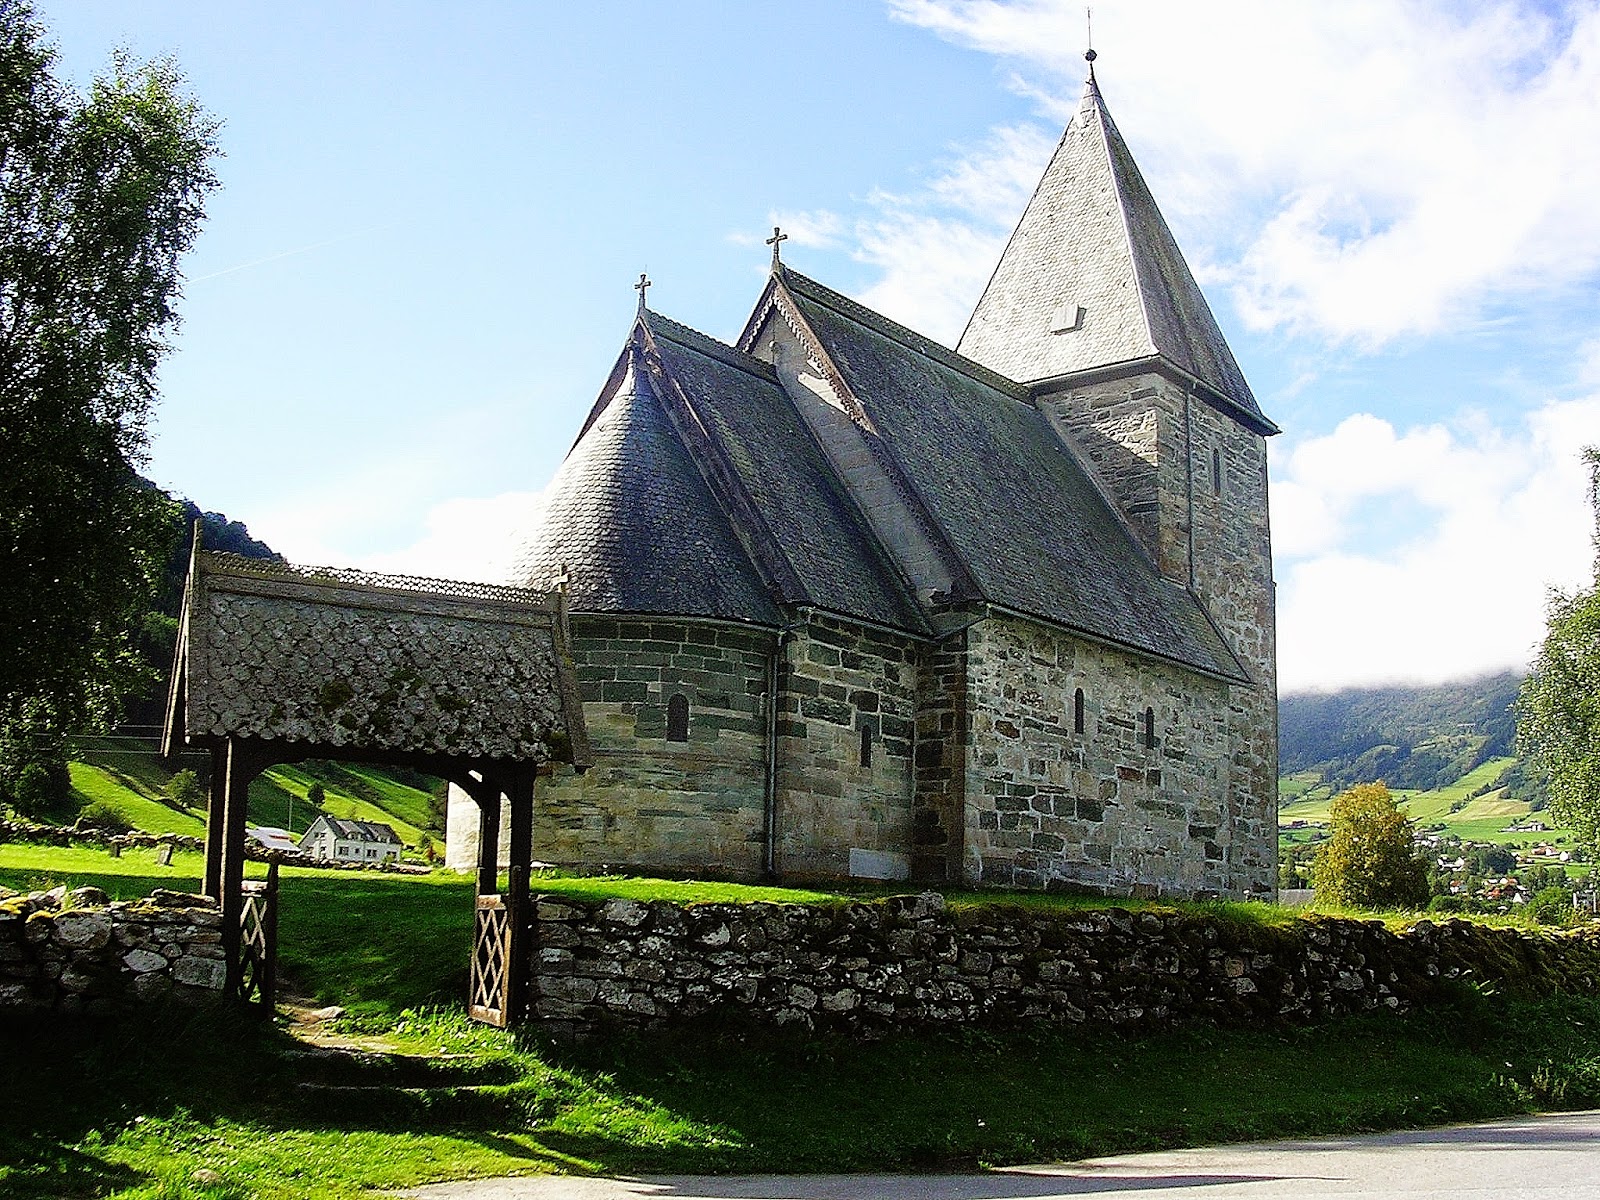 Hove Stone Church, at Vik. Dragons under the eaves. | Norway Road ...